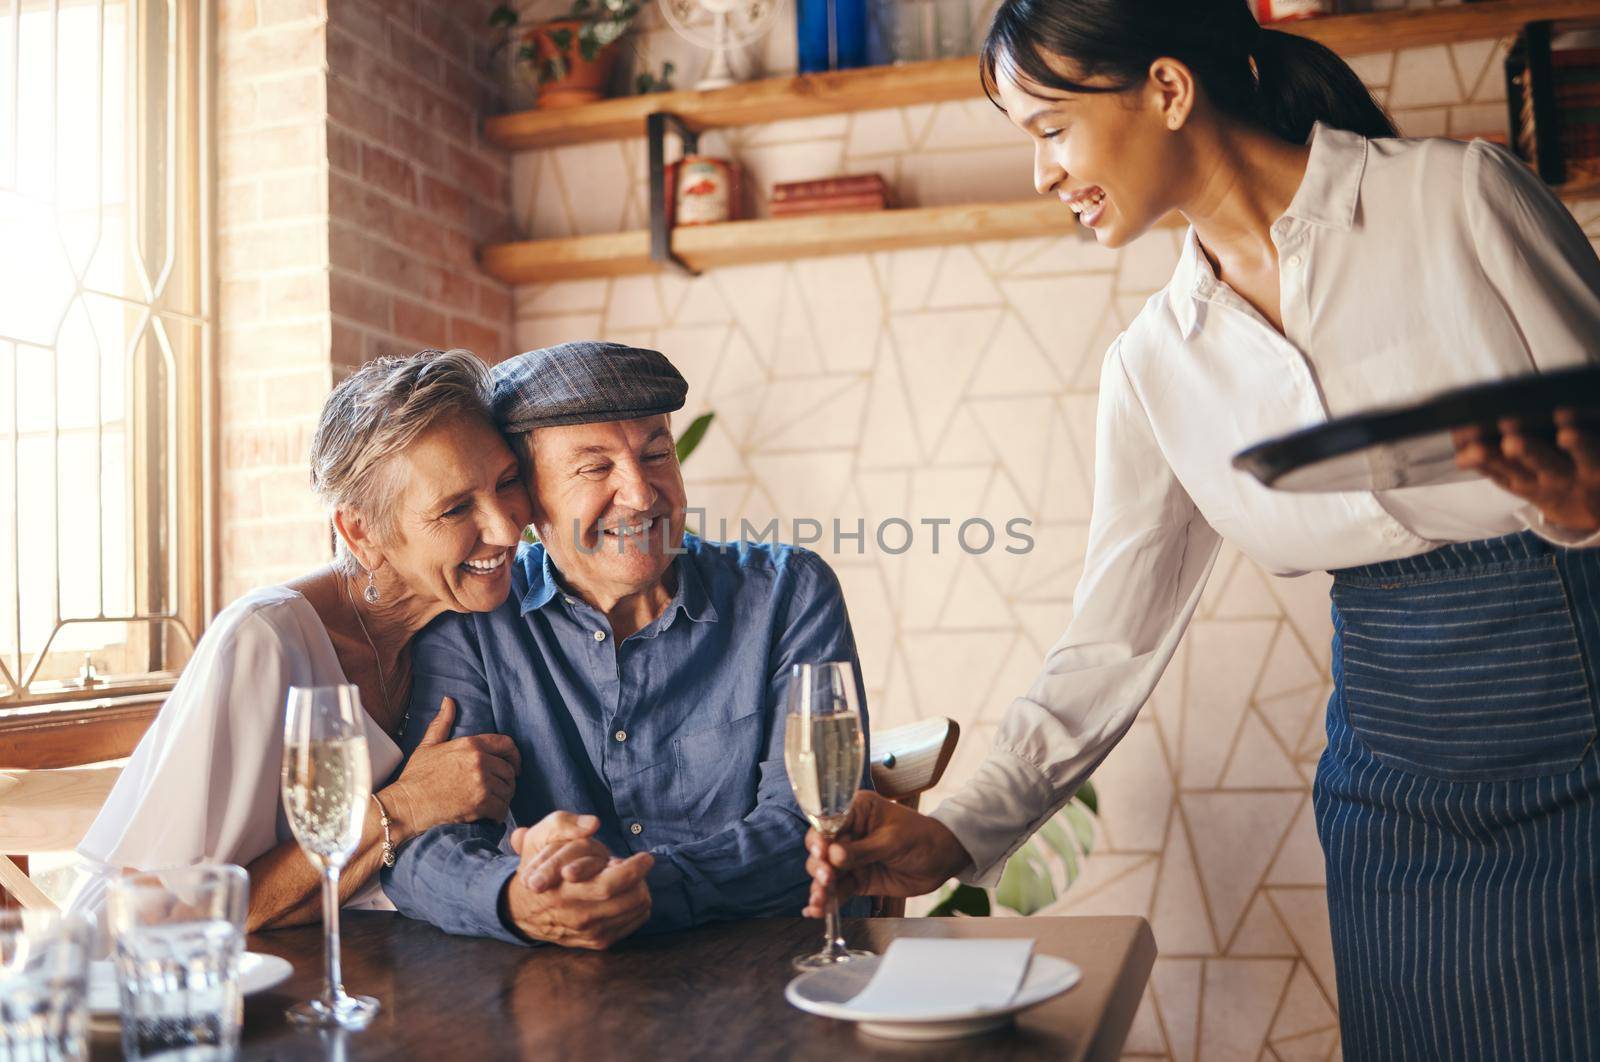 Love, couple elderly and celebrate marriage with date and wine at restaurant, happy, smile or relax together. Loving, senior man and woman with champagne for celebration of retirement or anniversary.